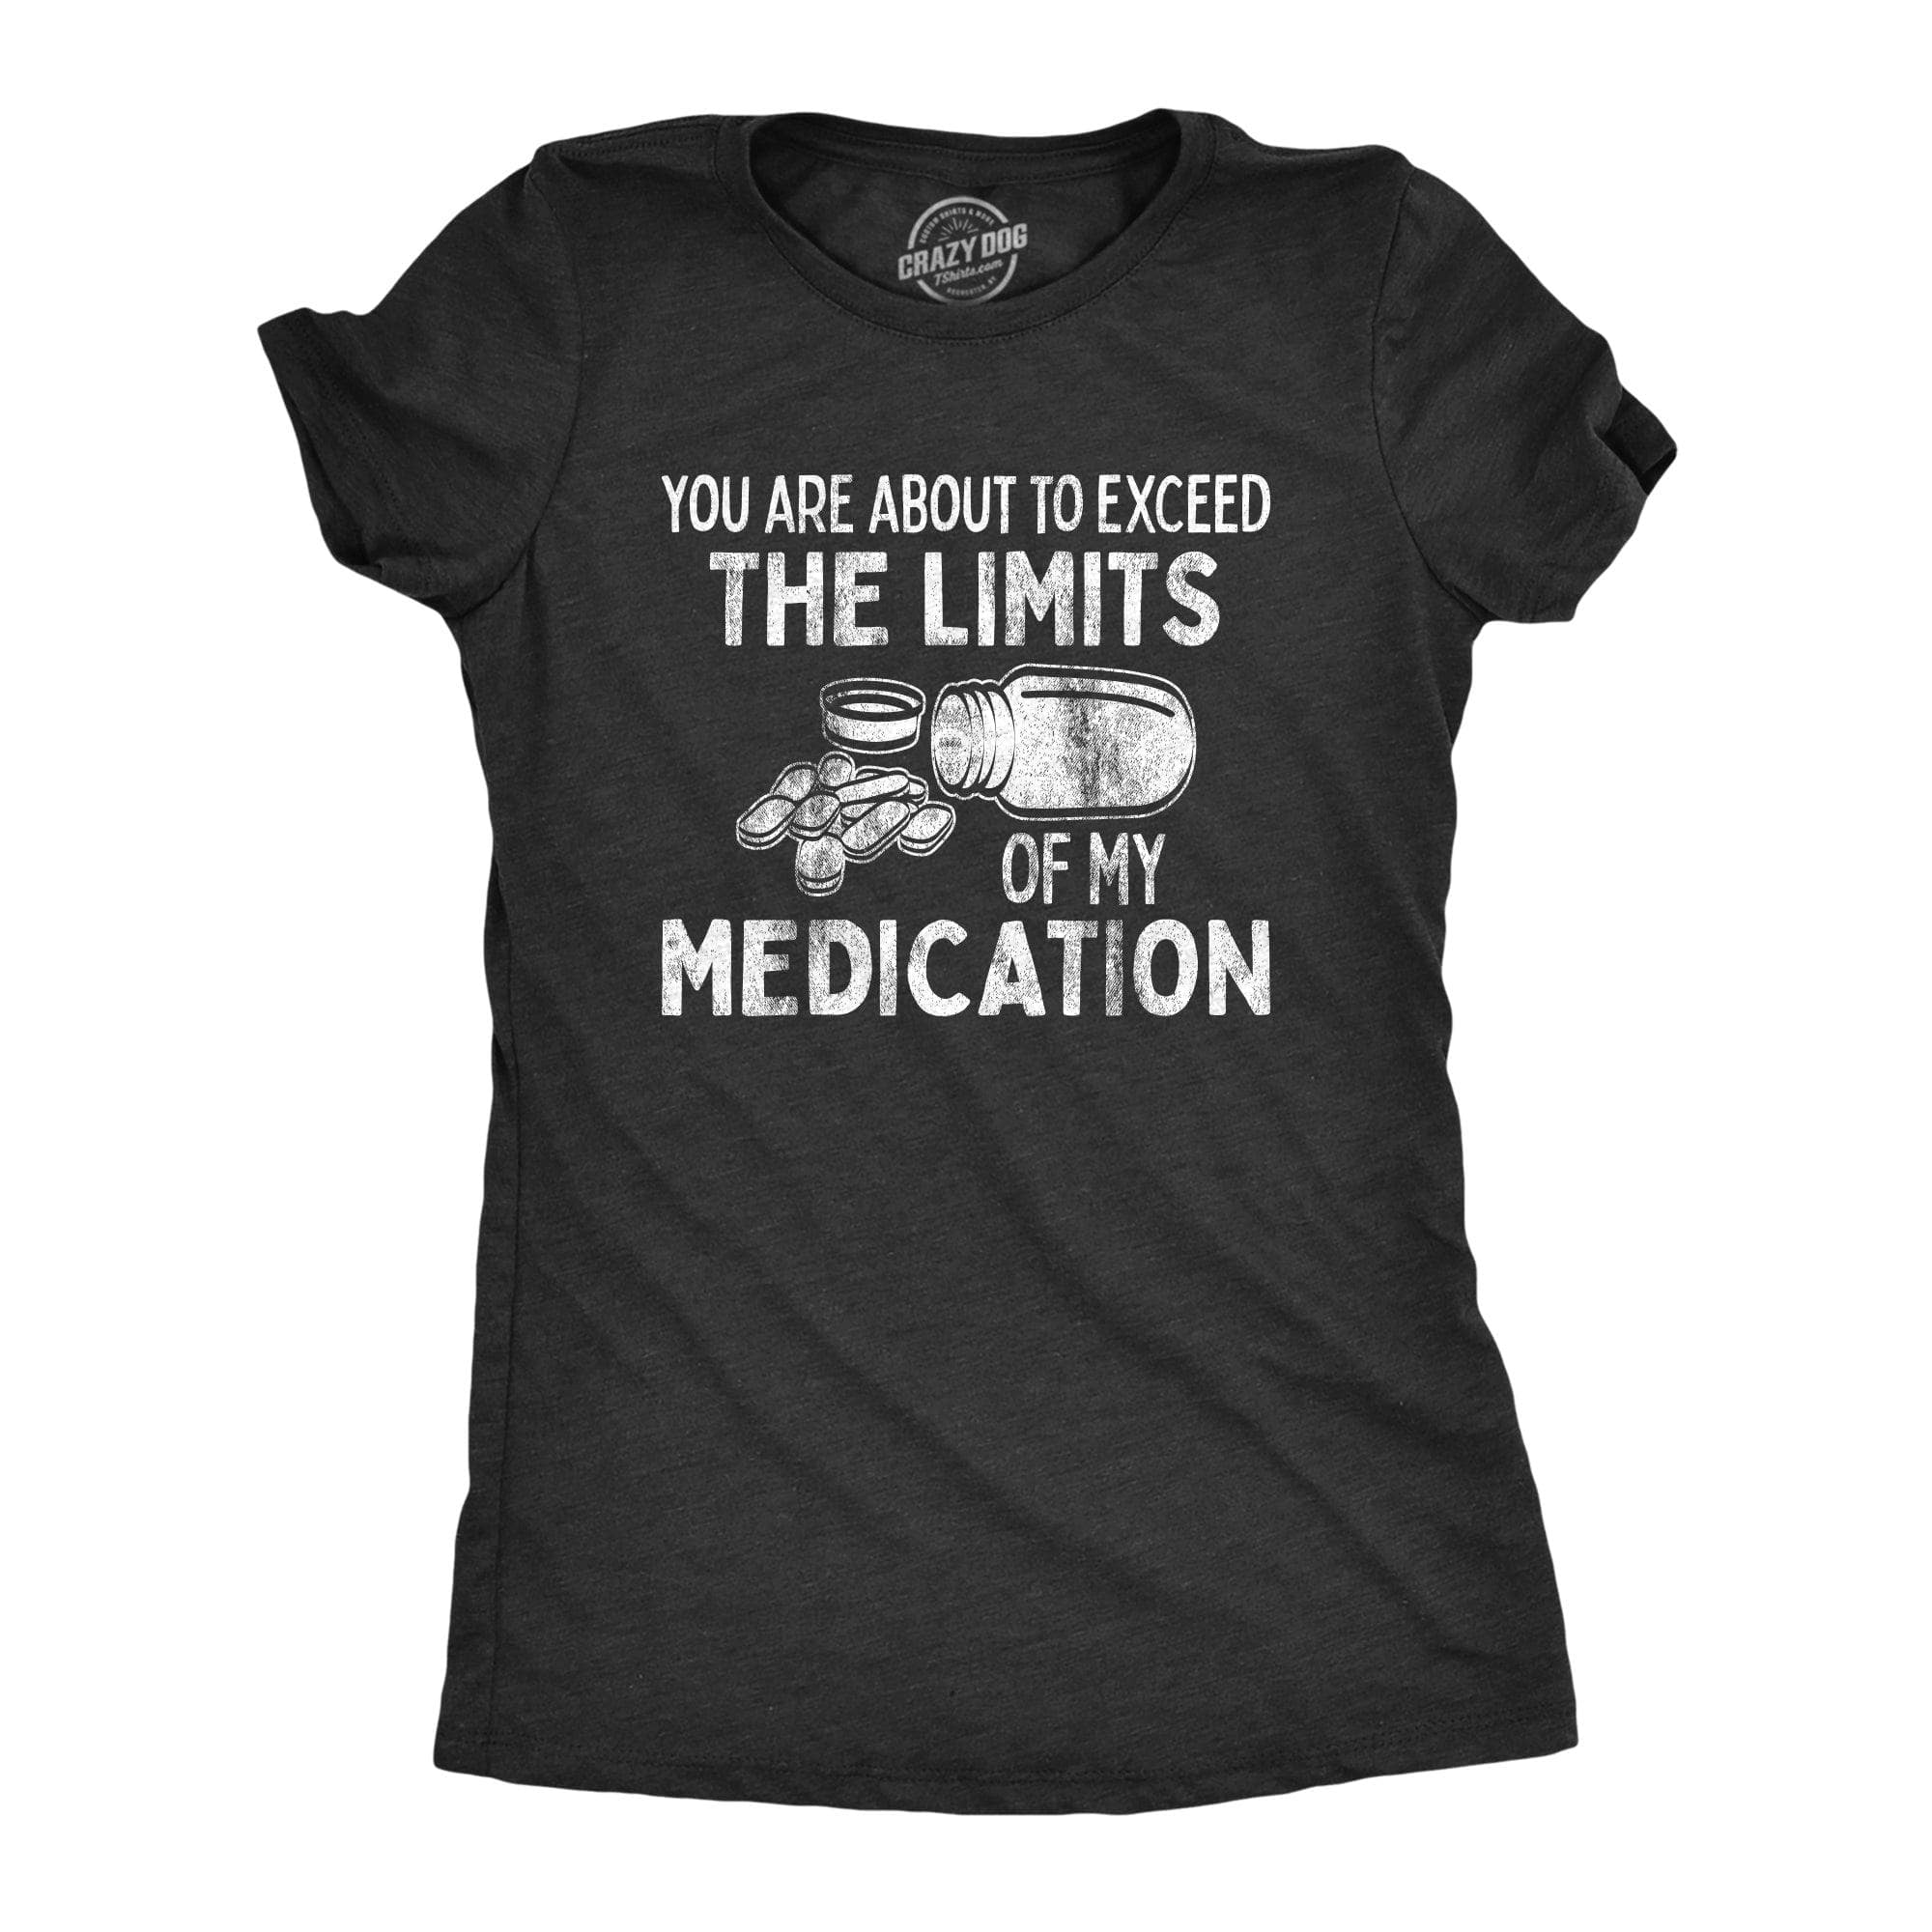 You Are About To Exceed The Limits Of My Medication Women's Tshirt  -  Crazy Dog T-Shirts